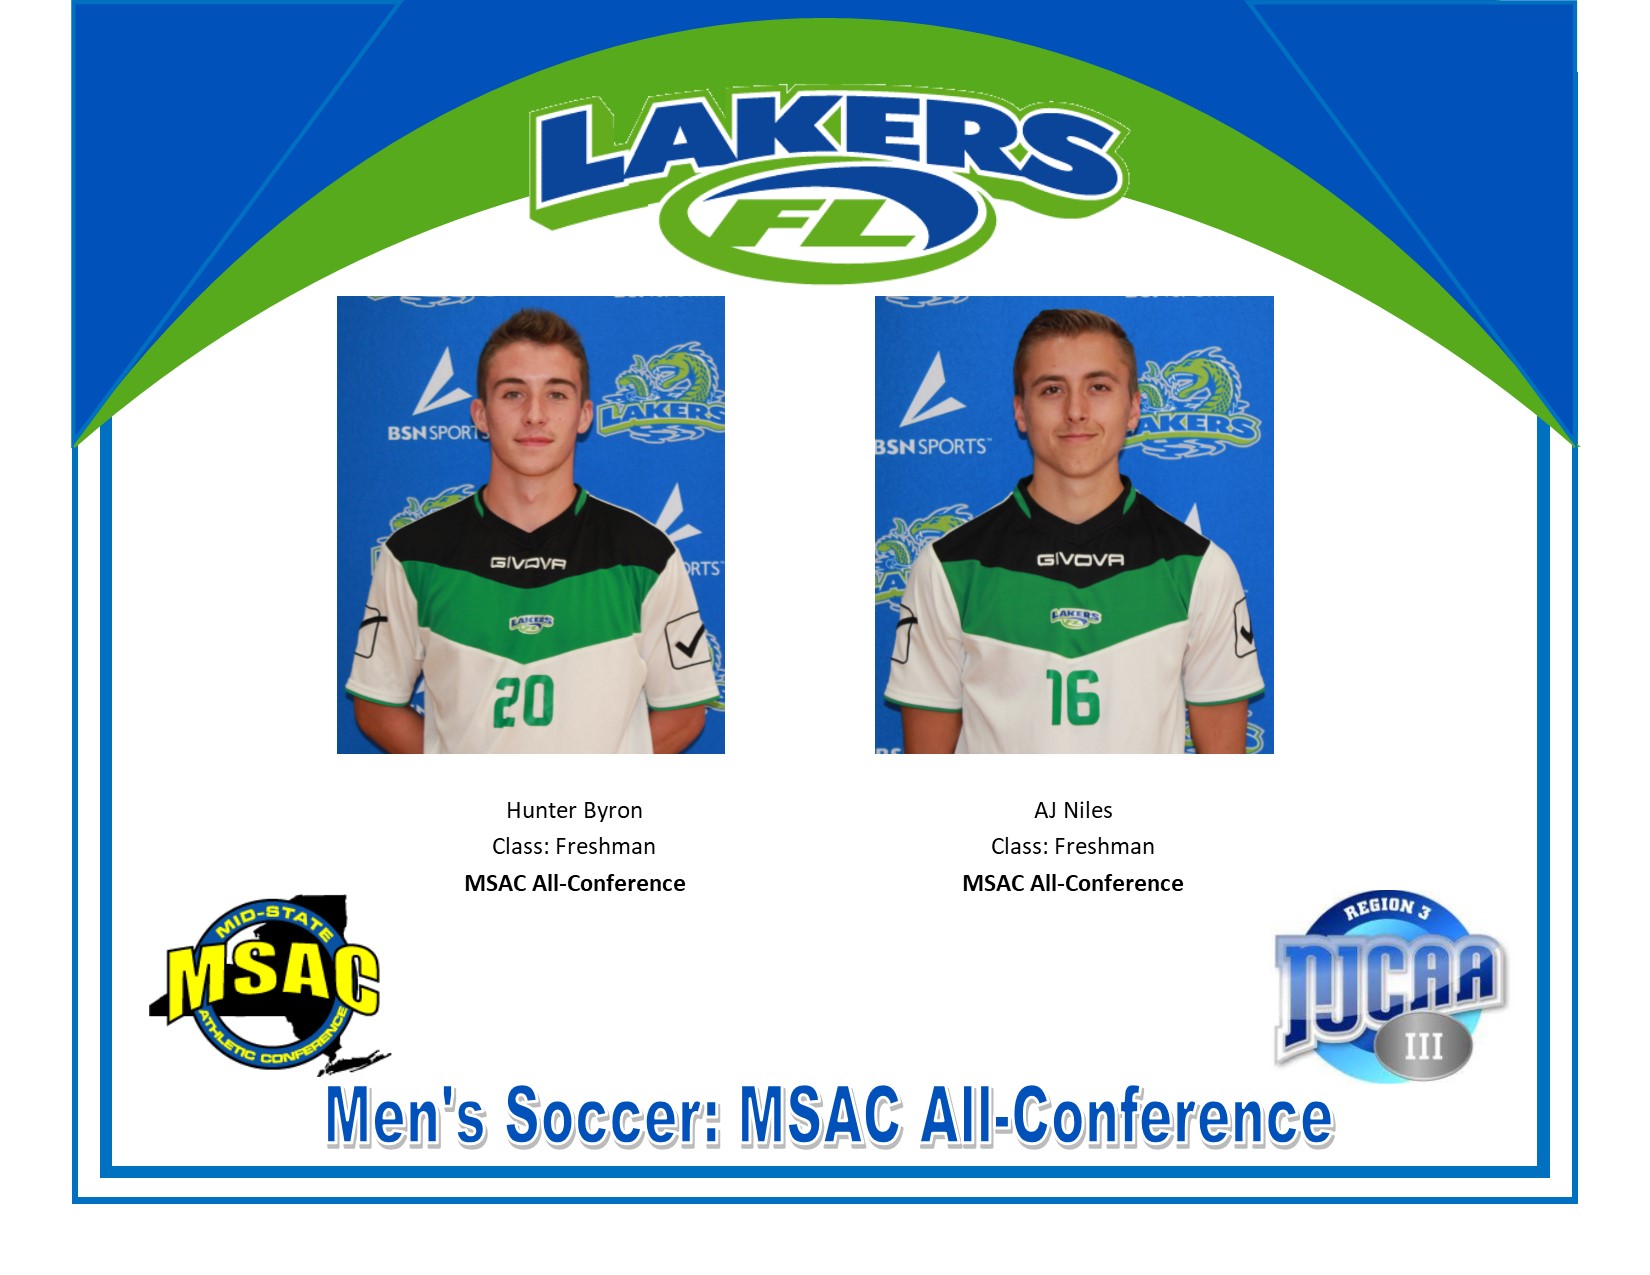 Two Lakers Named to 2019 Men's Soccer MSAC All-Conference Team